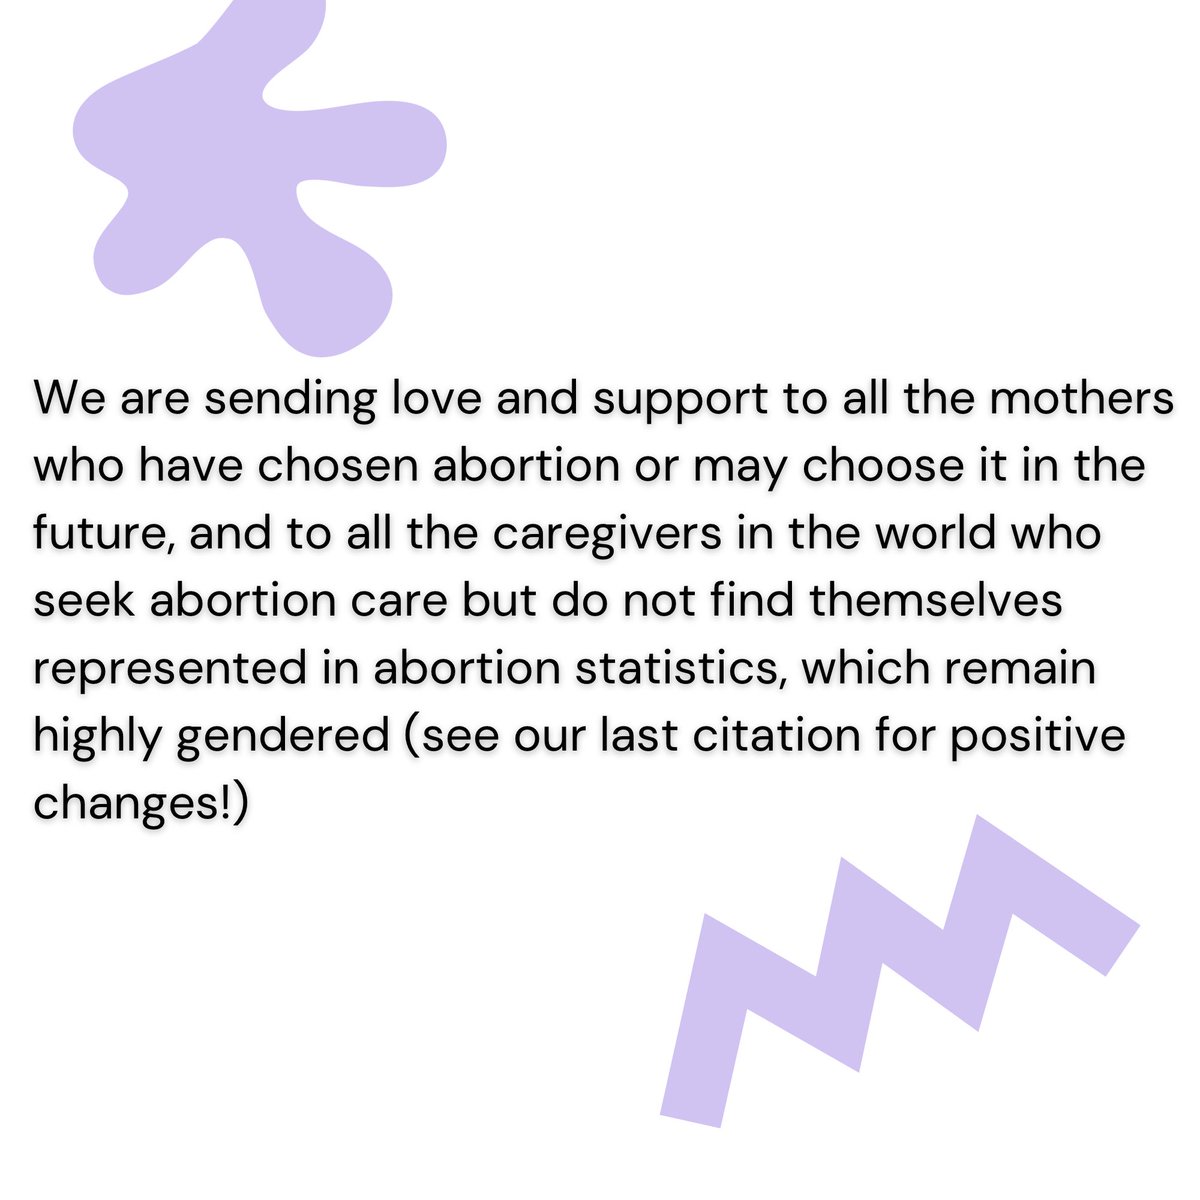 We are sending love and support to all the mothers who have chosen abortion or may choose it in the future, and to all the caregivers in the world who seek abortion care but do not find themselves represented in abortion statistics, which remain highly gendered.